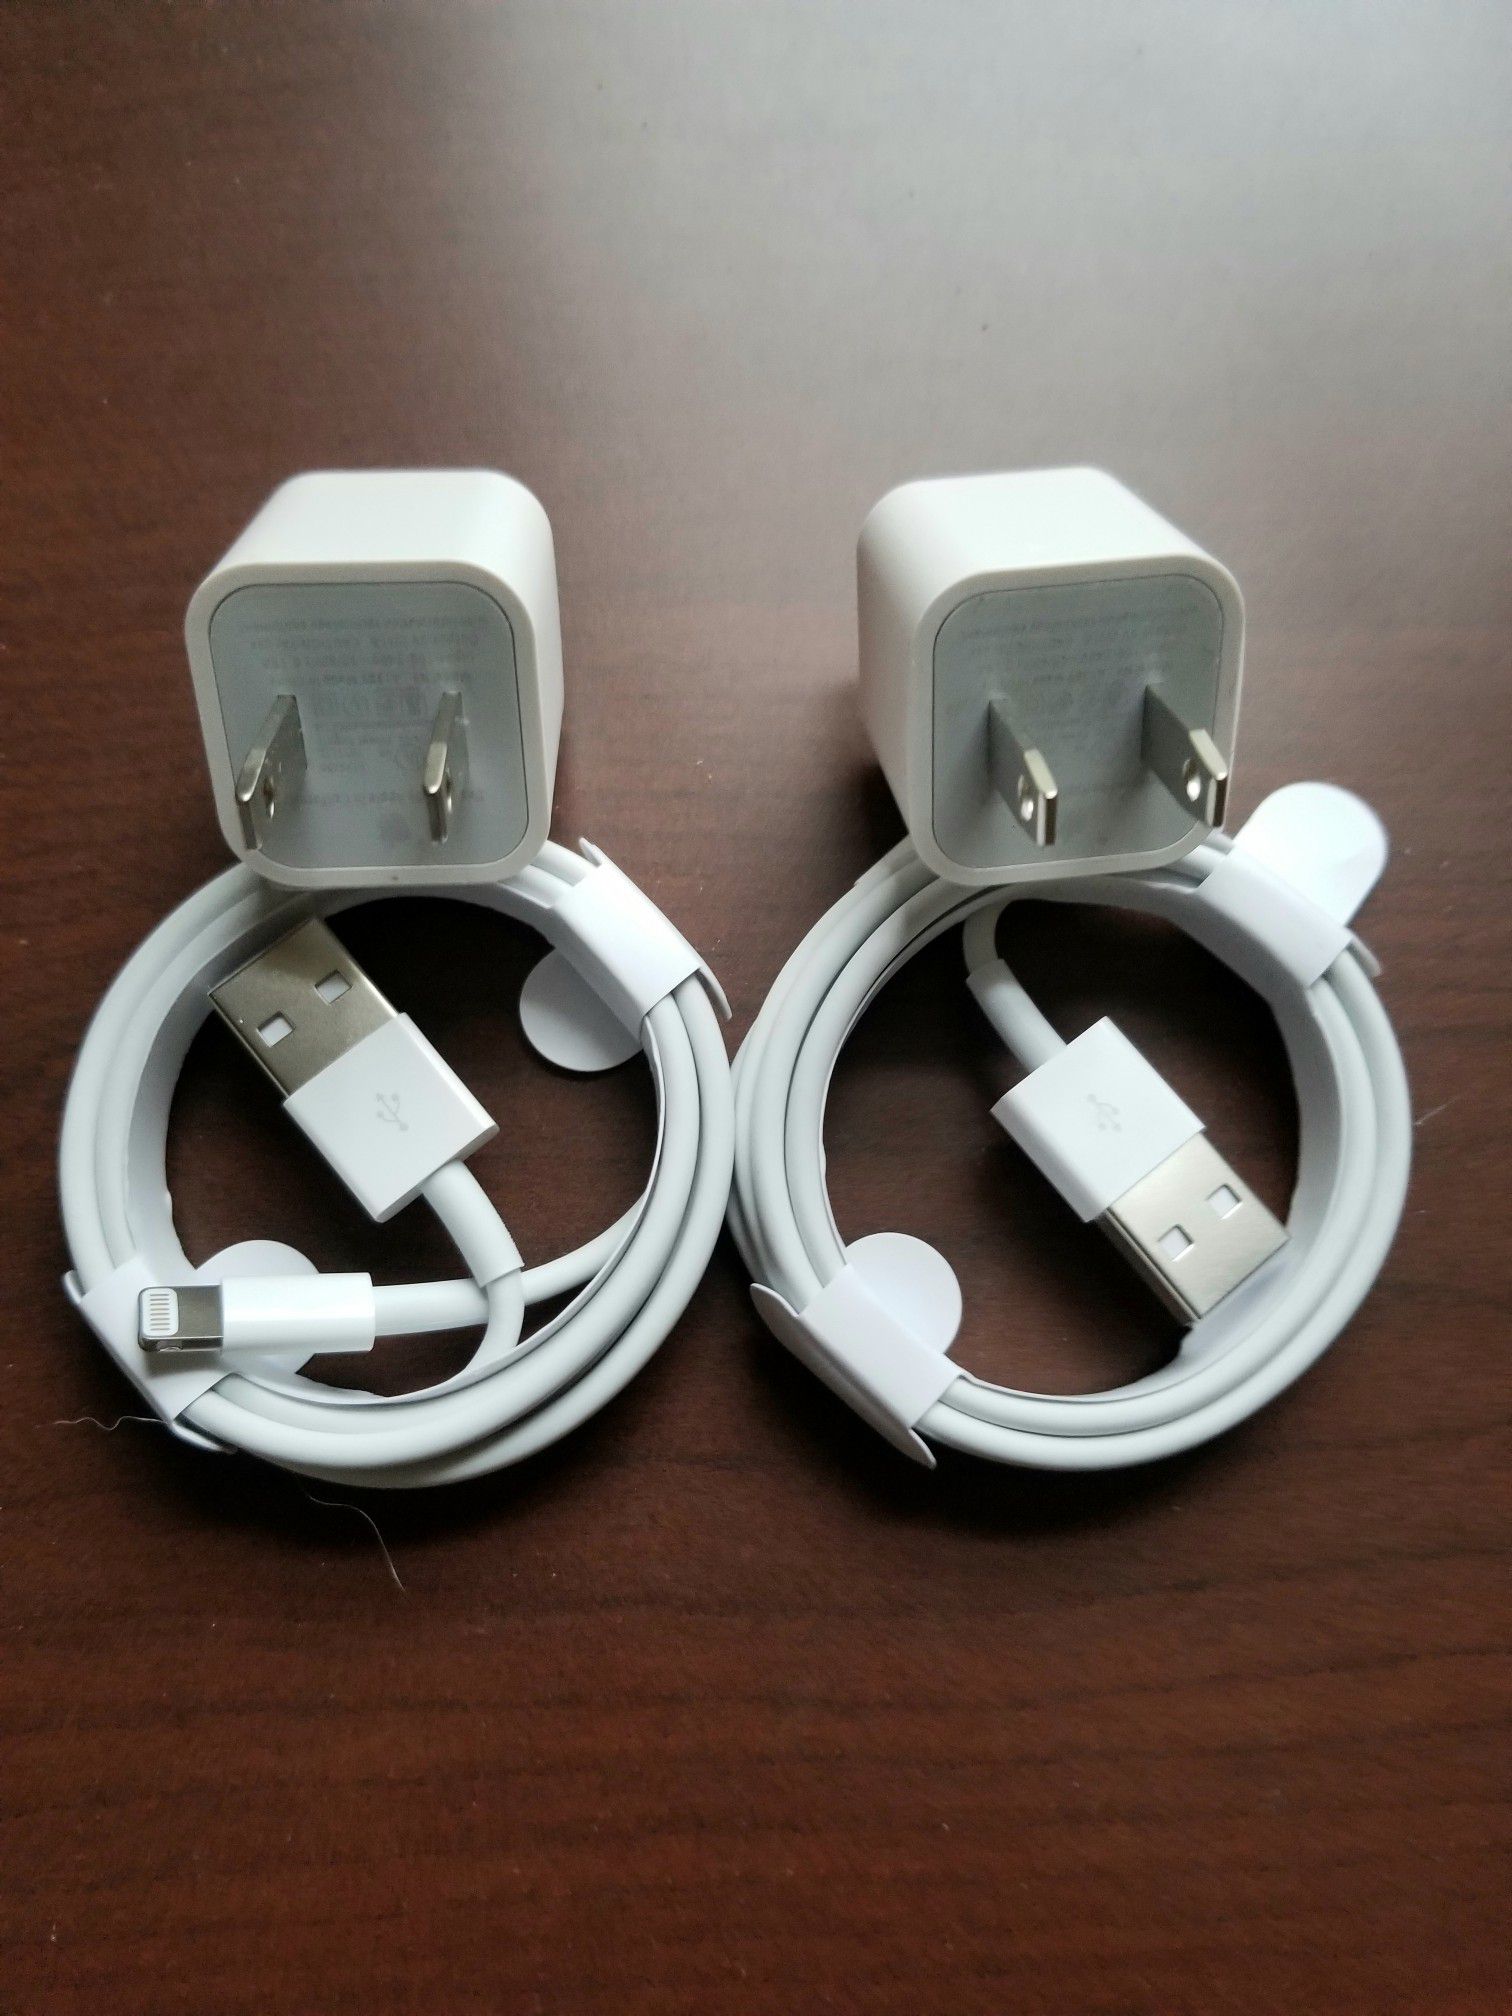 2 original brand new apple chargers